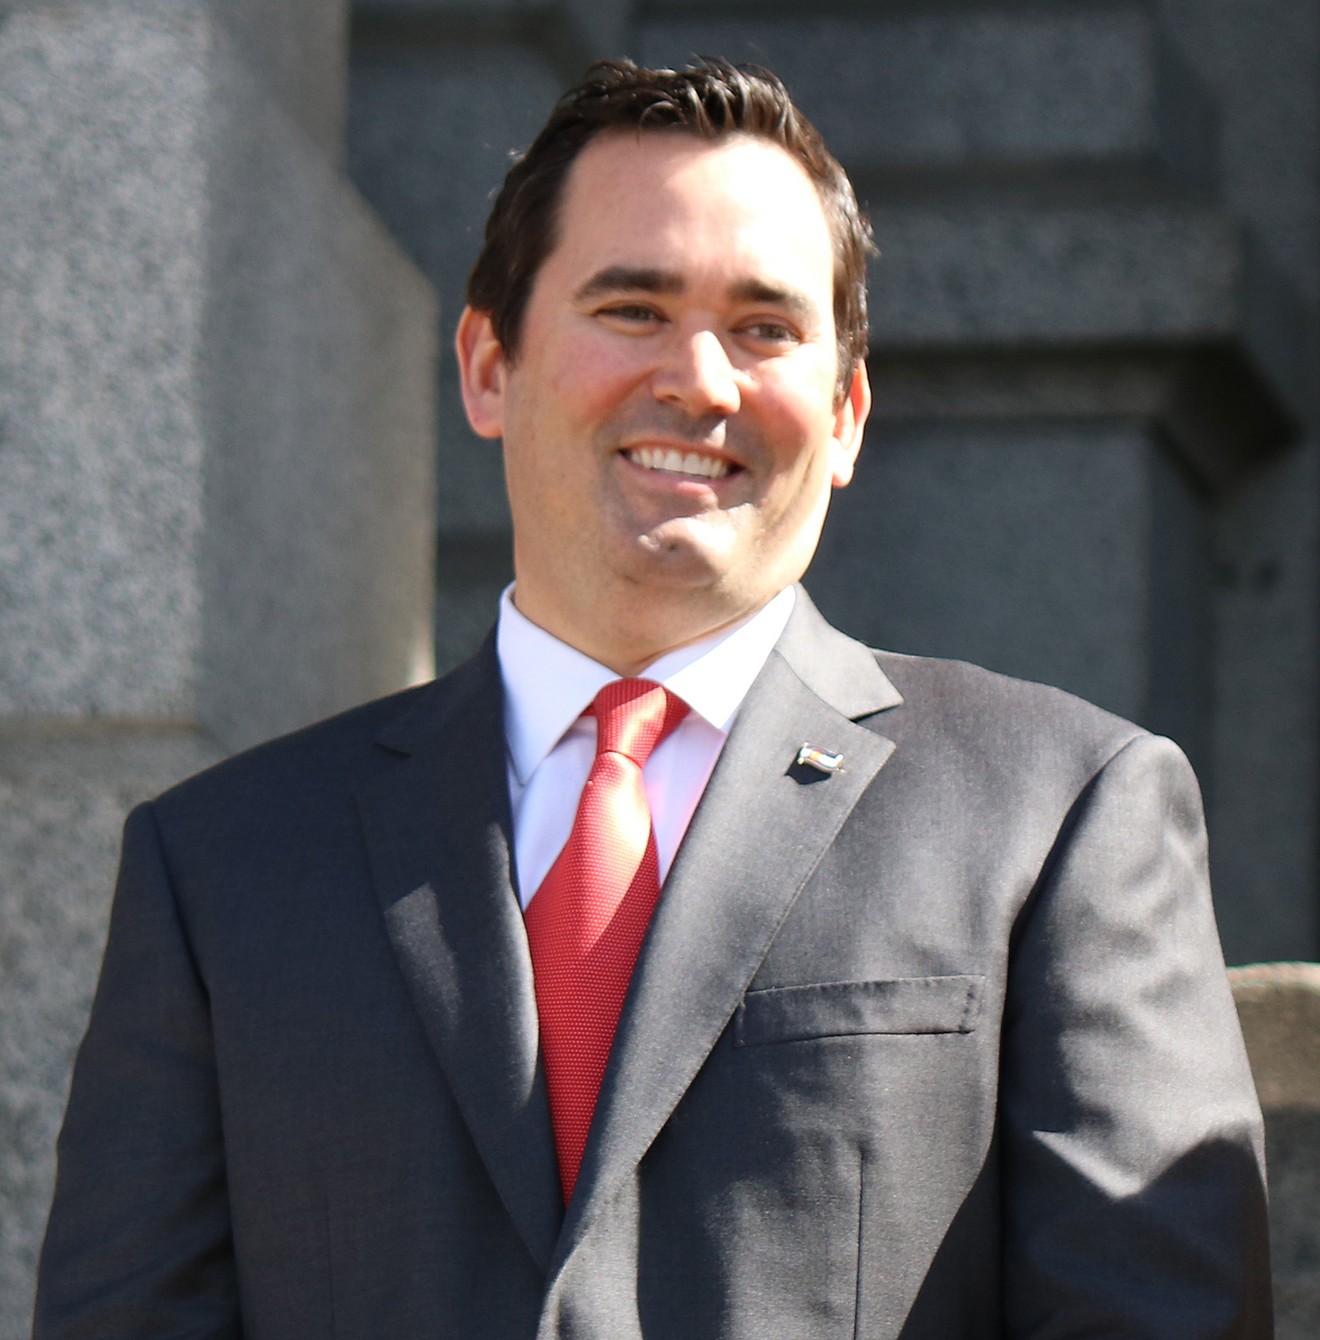 Walker Stapleton, pictured here with his Invisible Friend Running Mate.